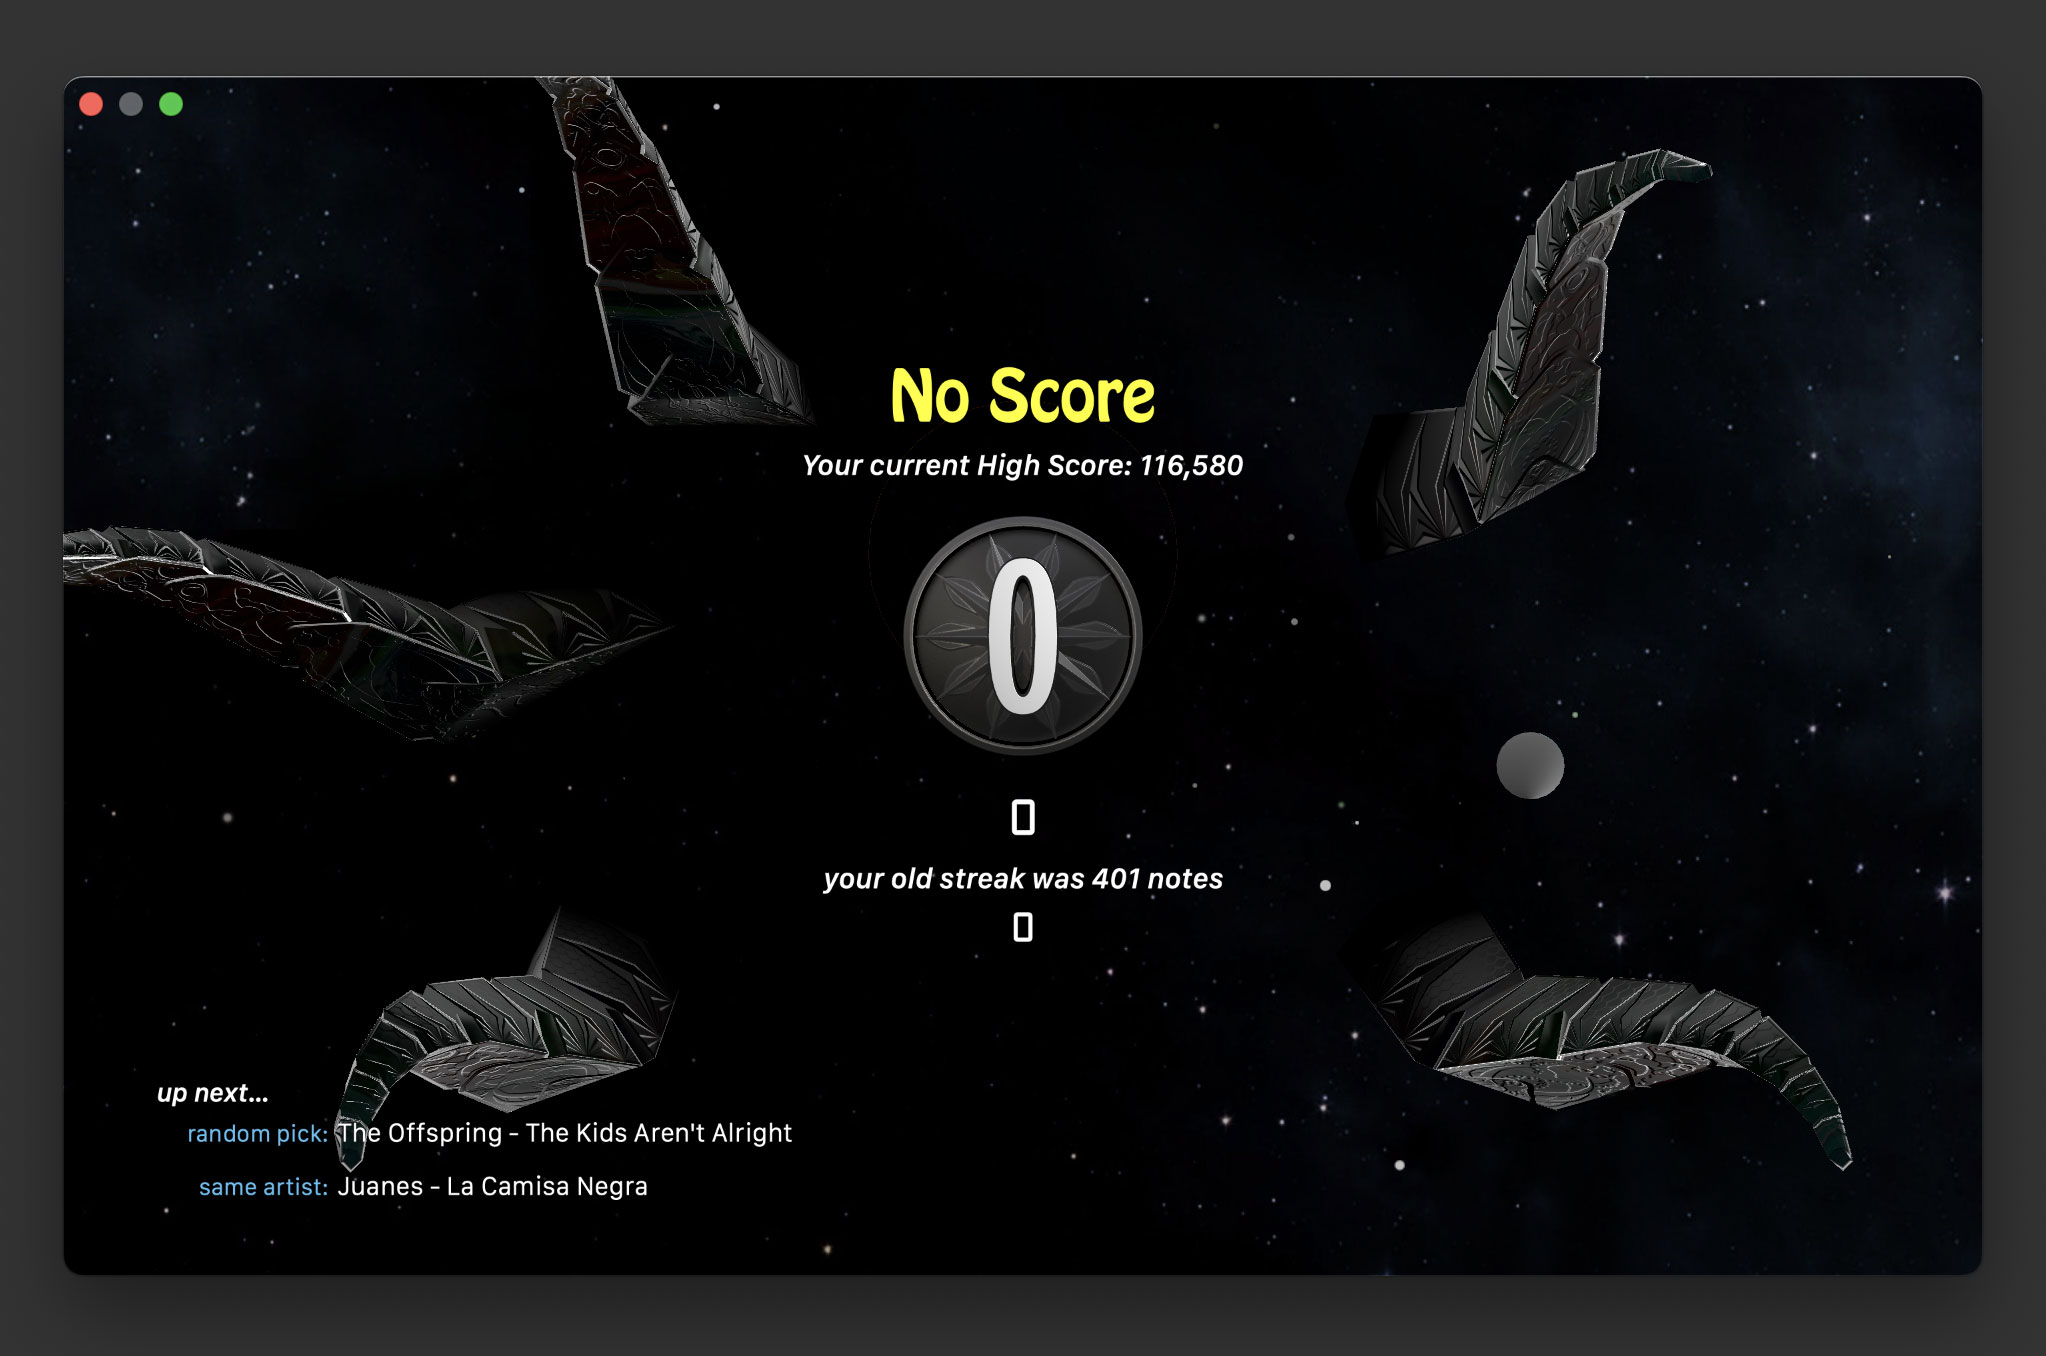 noice score display screen - featuring new star system and random song layout